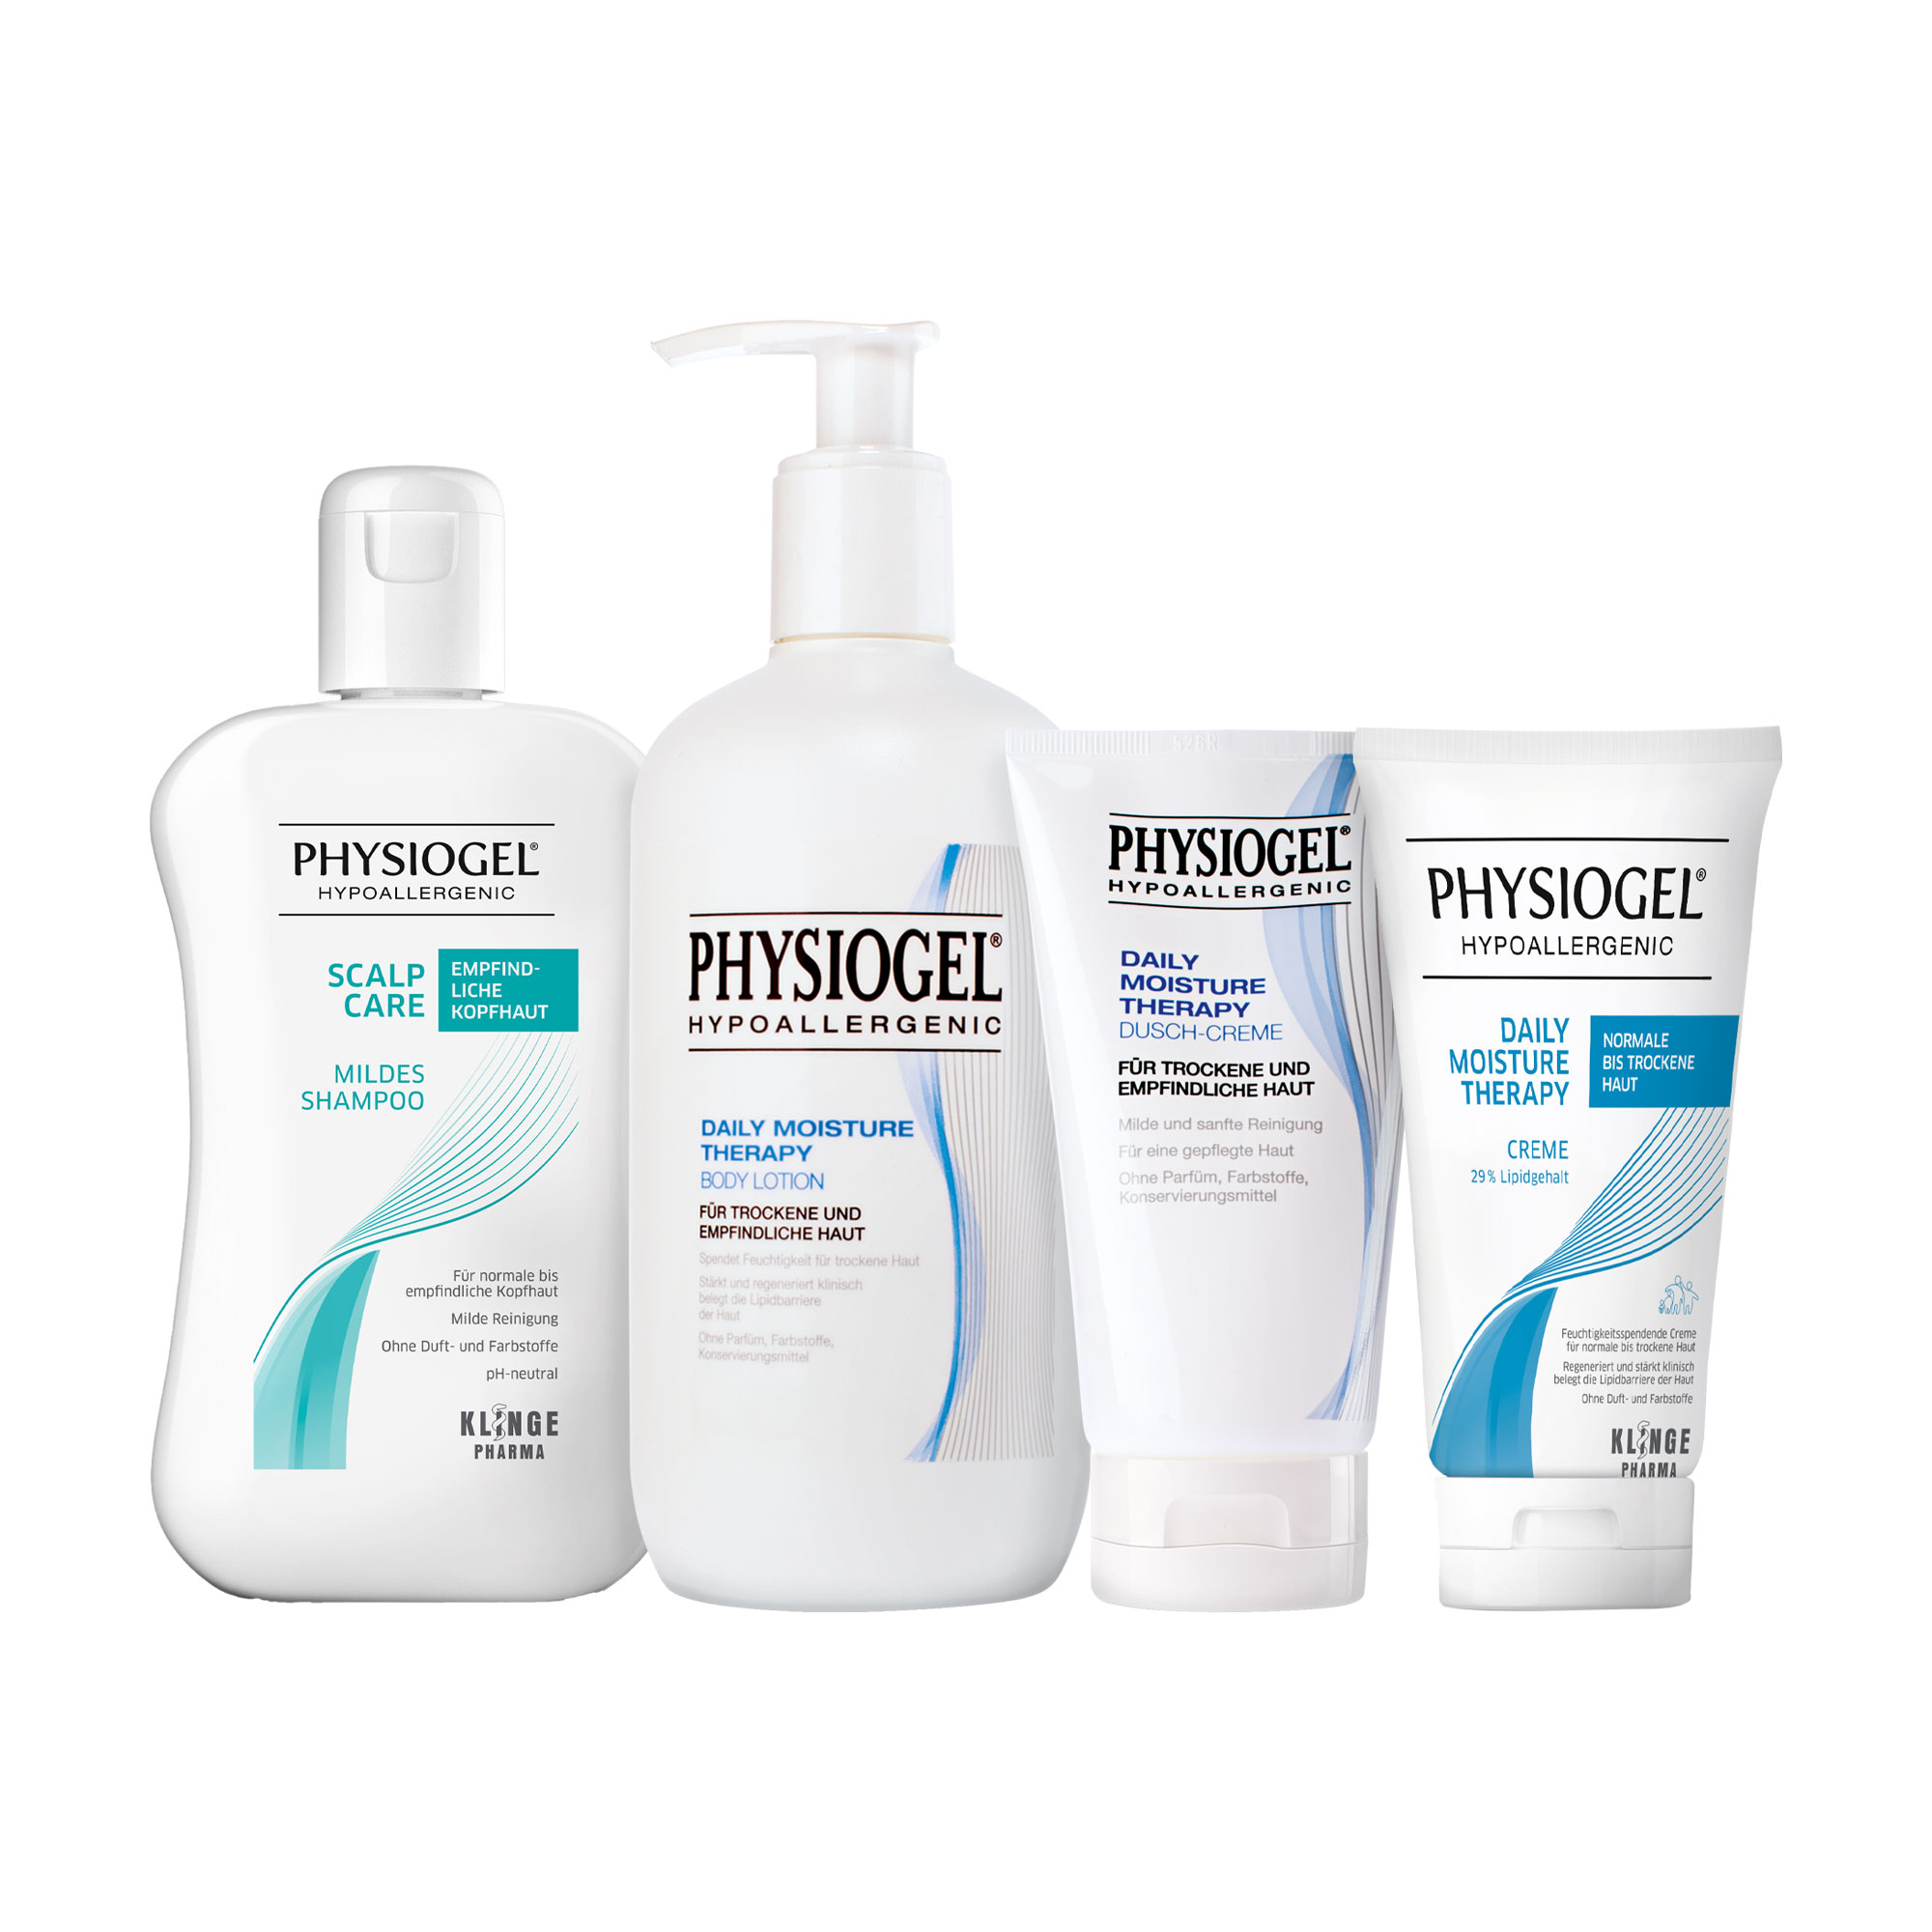 Dieses Set besteht aus Physiogel Scalp Care Mildes Shampoo,  Physiogel Daily Moisture Therapy Body Lotion, Physiogel Daily Moisture Therapy Dusch Creme, und  Physiogel Daily Moisture Therapy Creme.